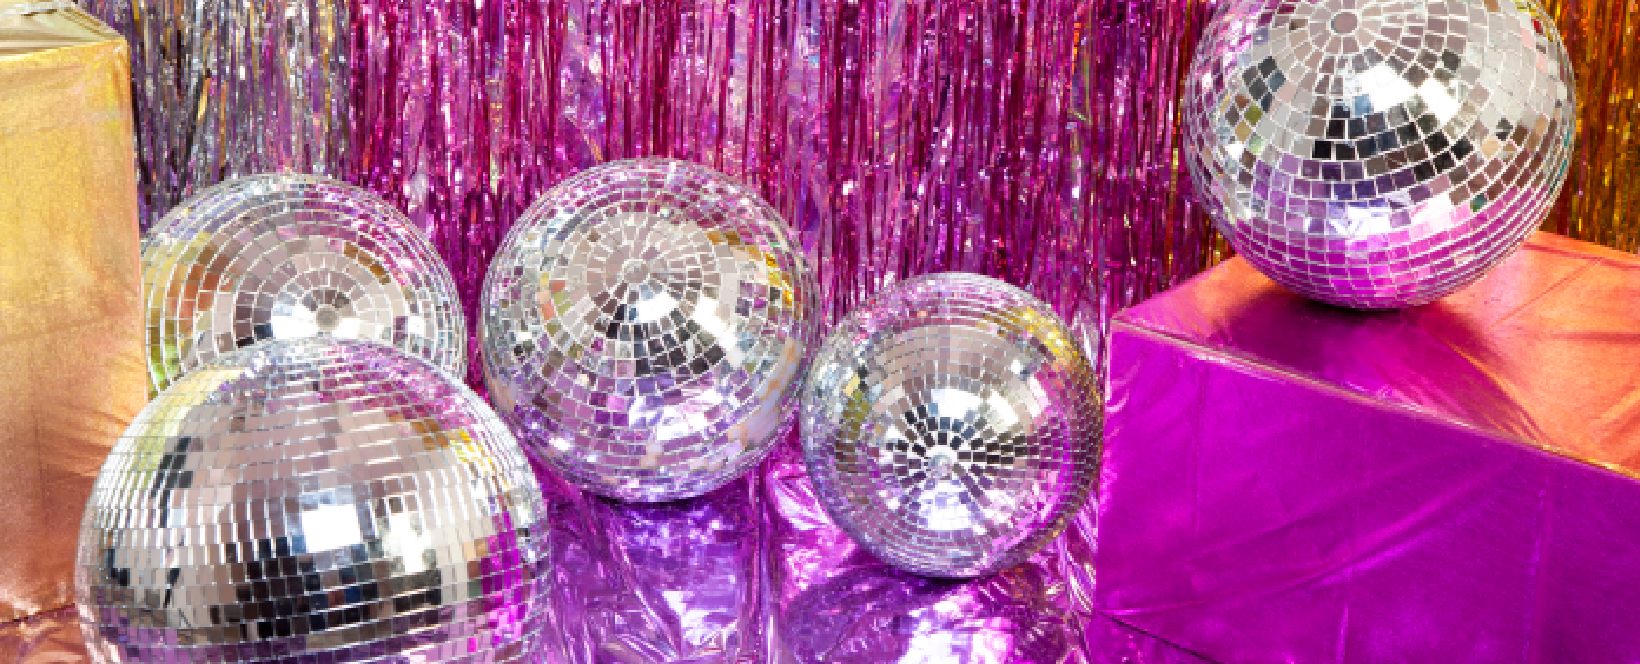 What's The Point Of Disco Balls? – eHomemart